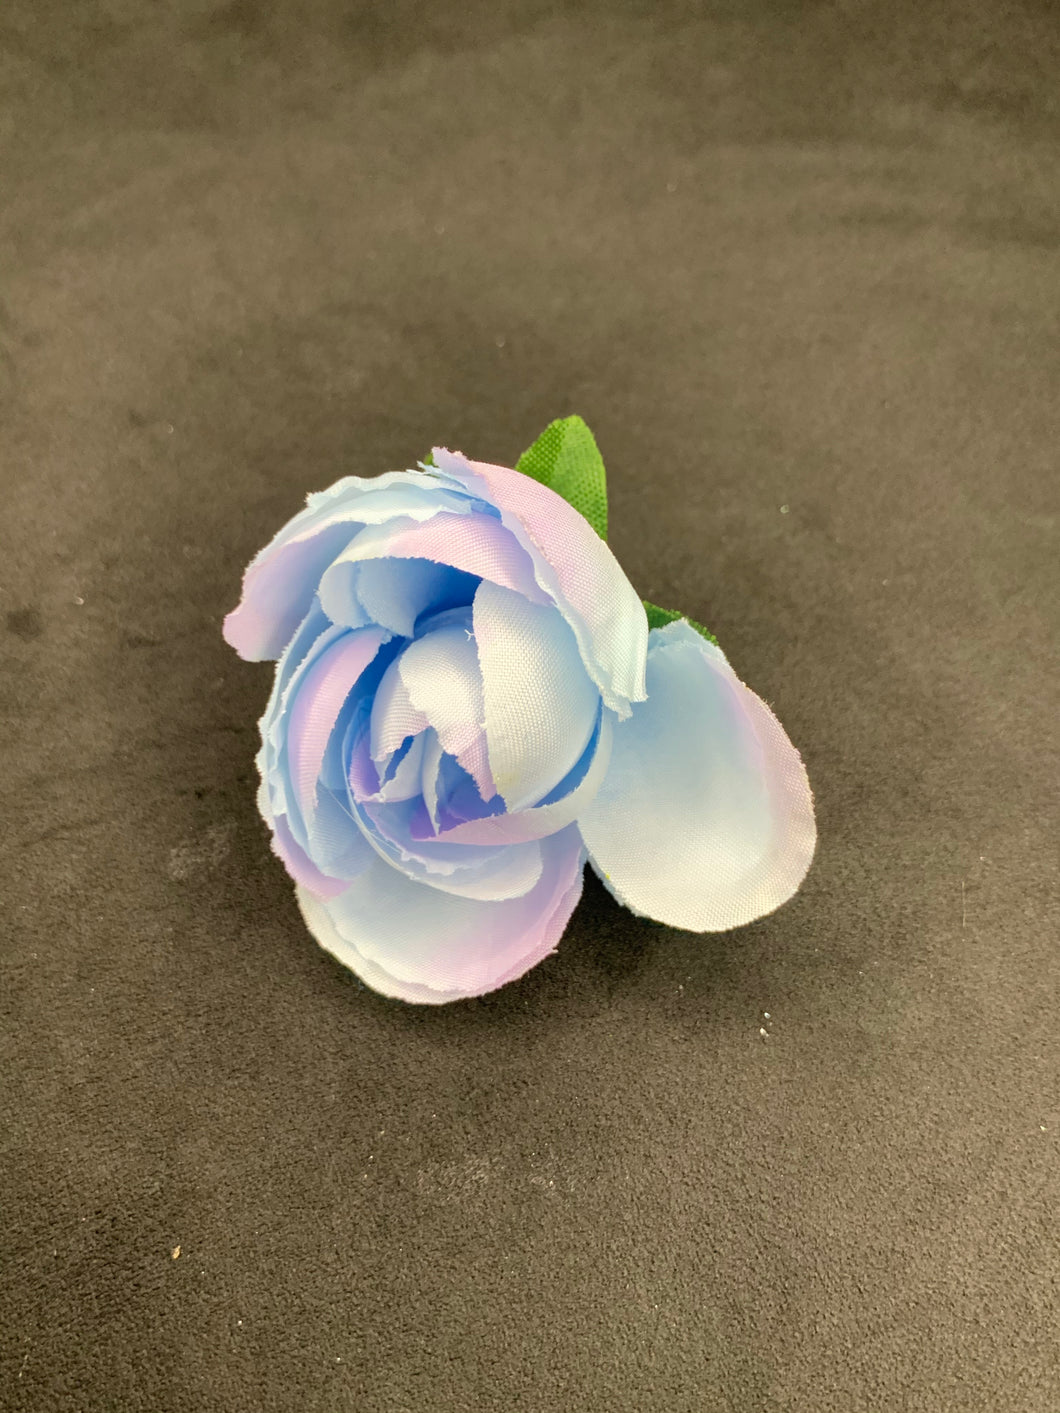 Metallic blue with lilac rose